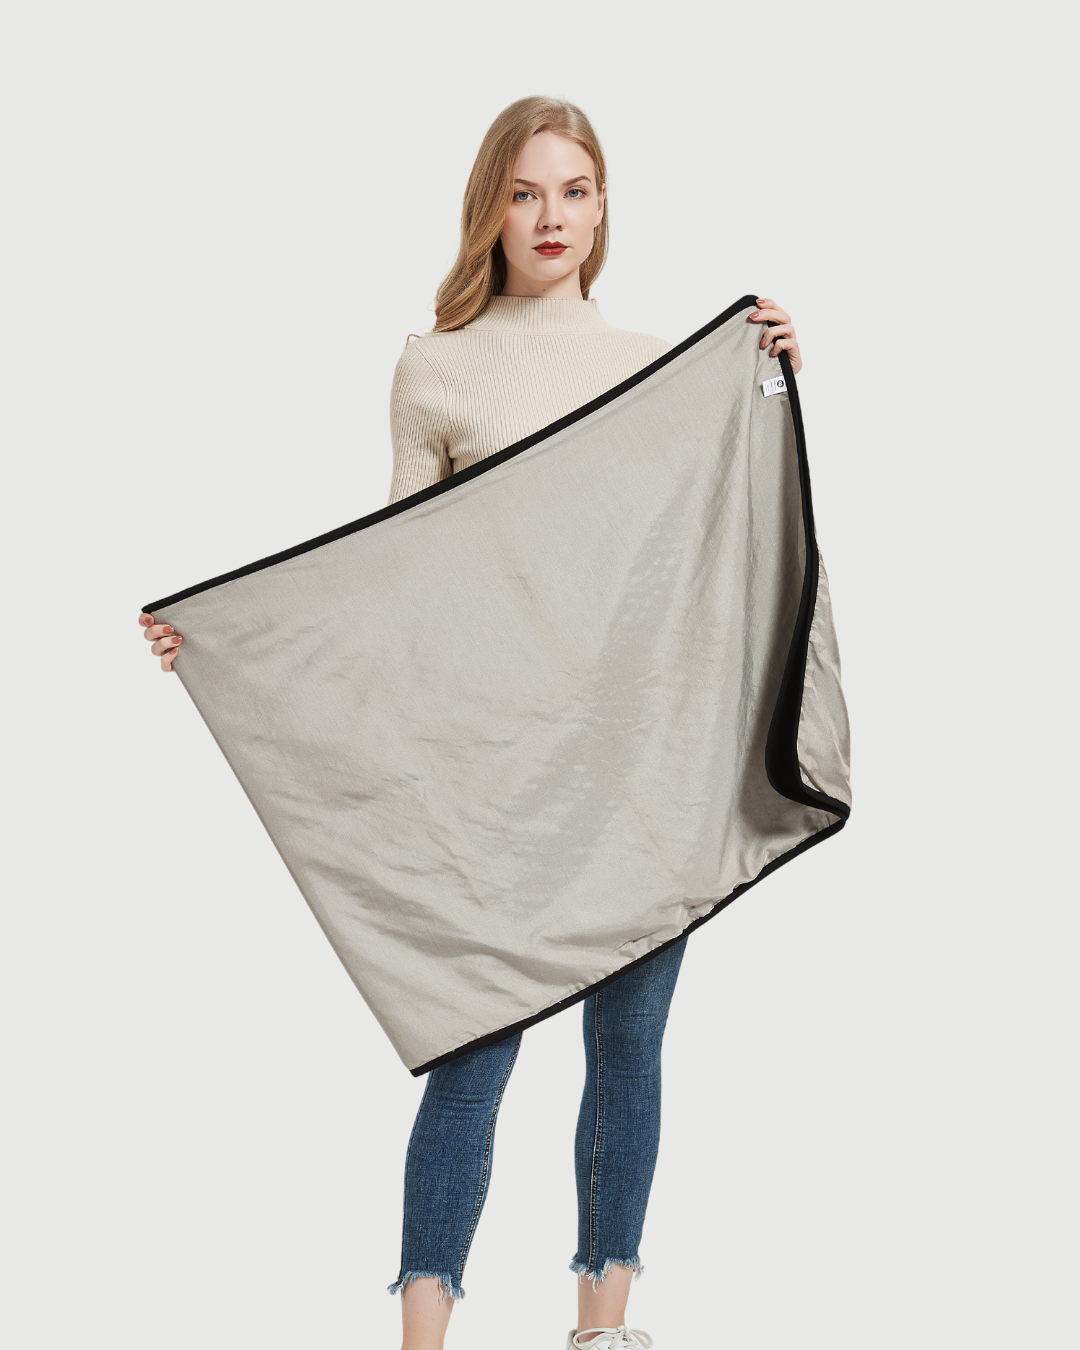 Homehours Faraday Blanket for Sleeping, Big Size 50IN * 60IN 127CM